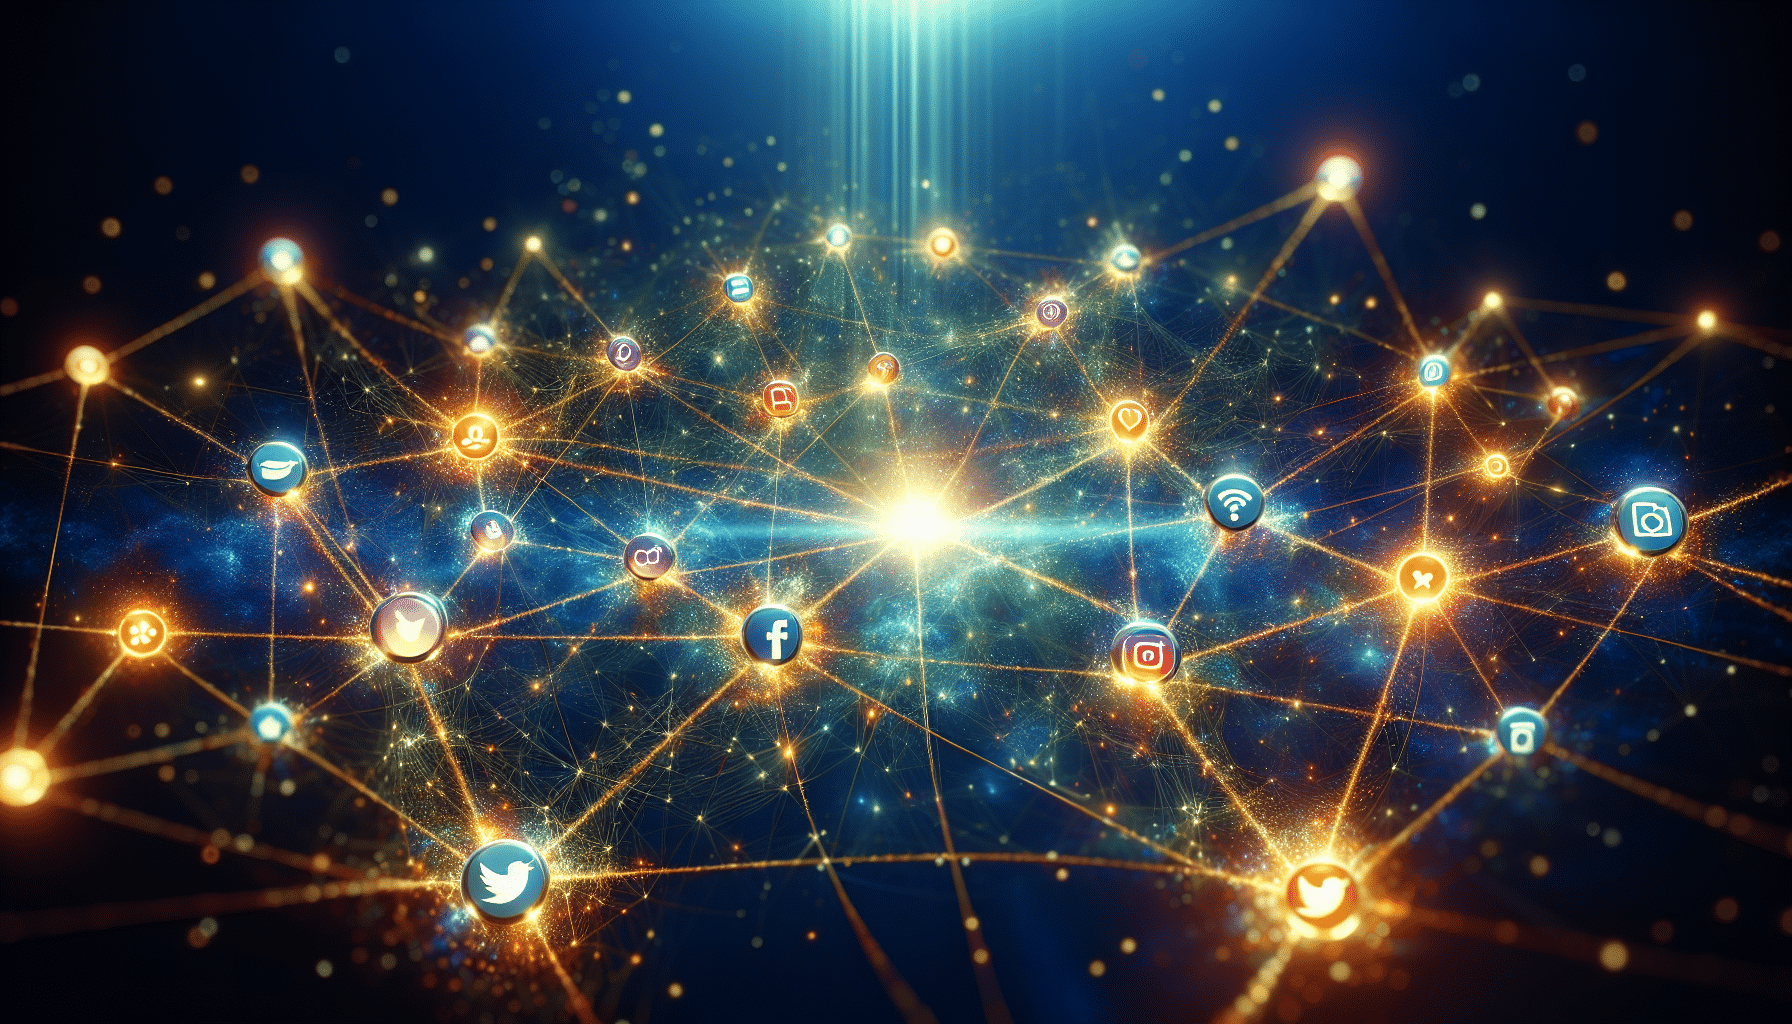 A network of interconnected social media icons representing expanding content reach